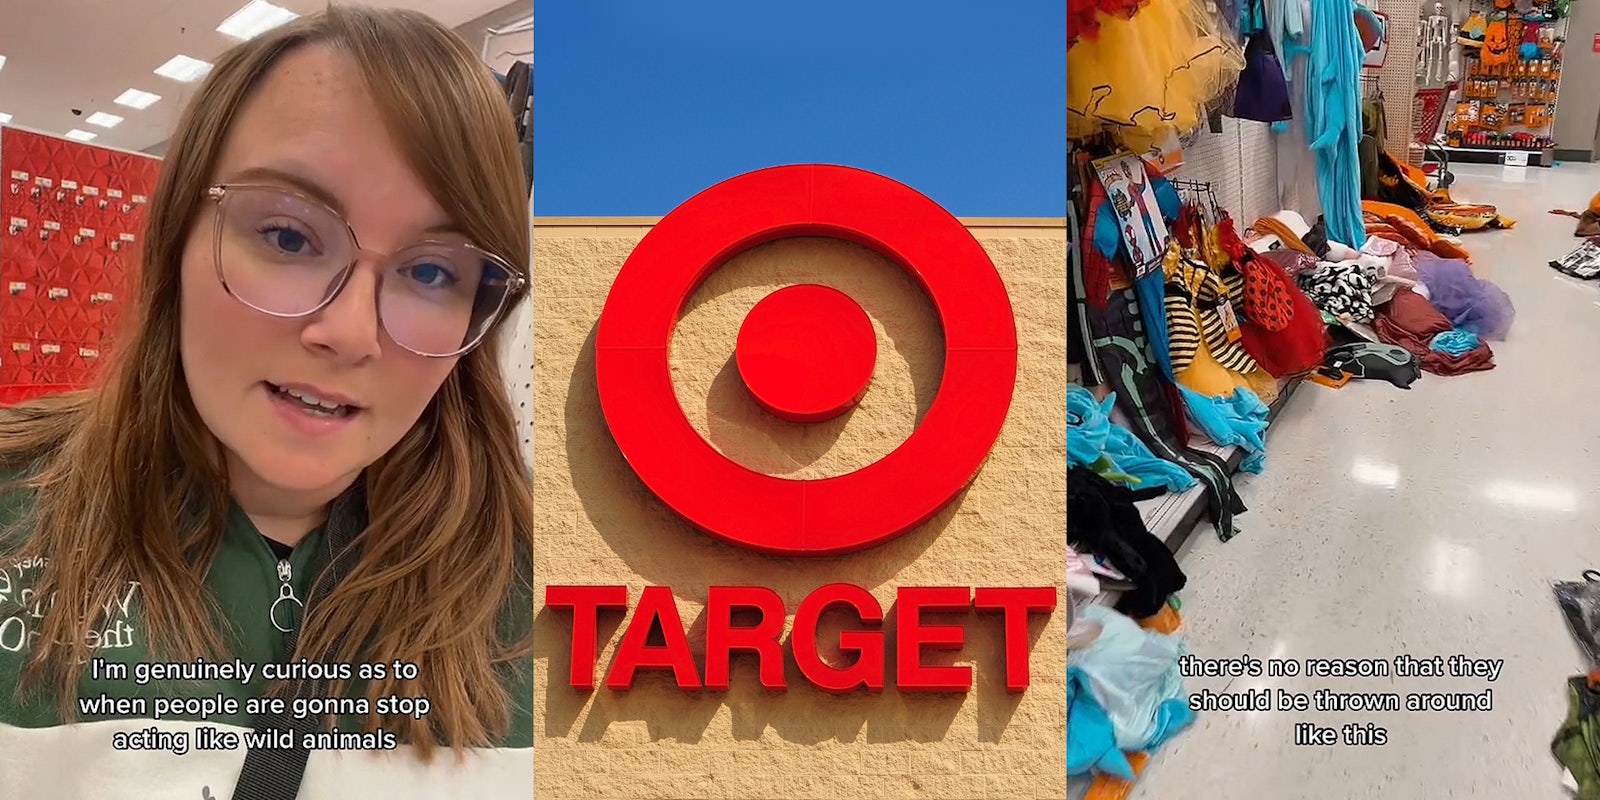 woman speaking in Target caption 'I'm genuinely curious as to when people are gonna stop acting like wild animals' (l) Target store sign on building with blue sky (c) Target Halloween section with costumes everywhere caption 'there's no reason that they should be thrown around like this' (r)